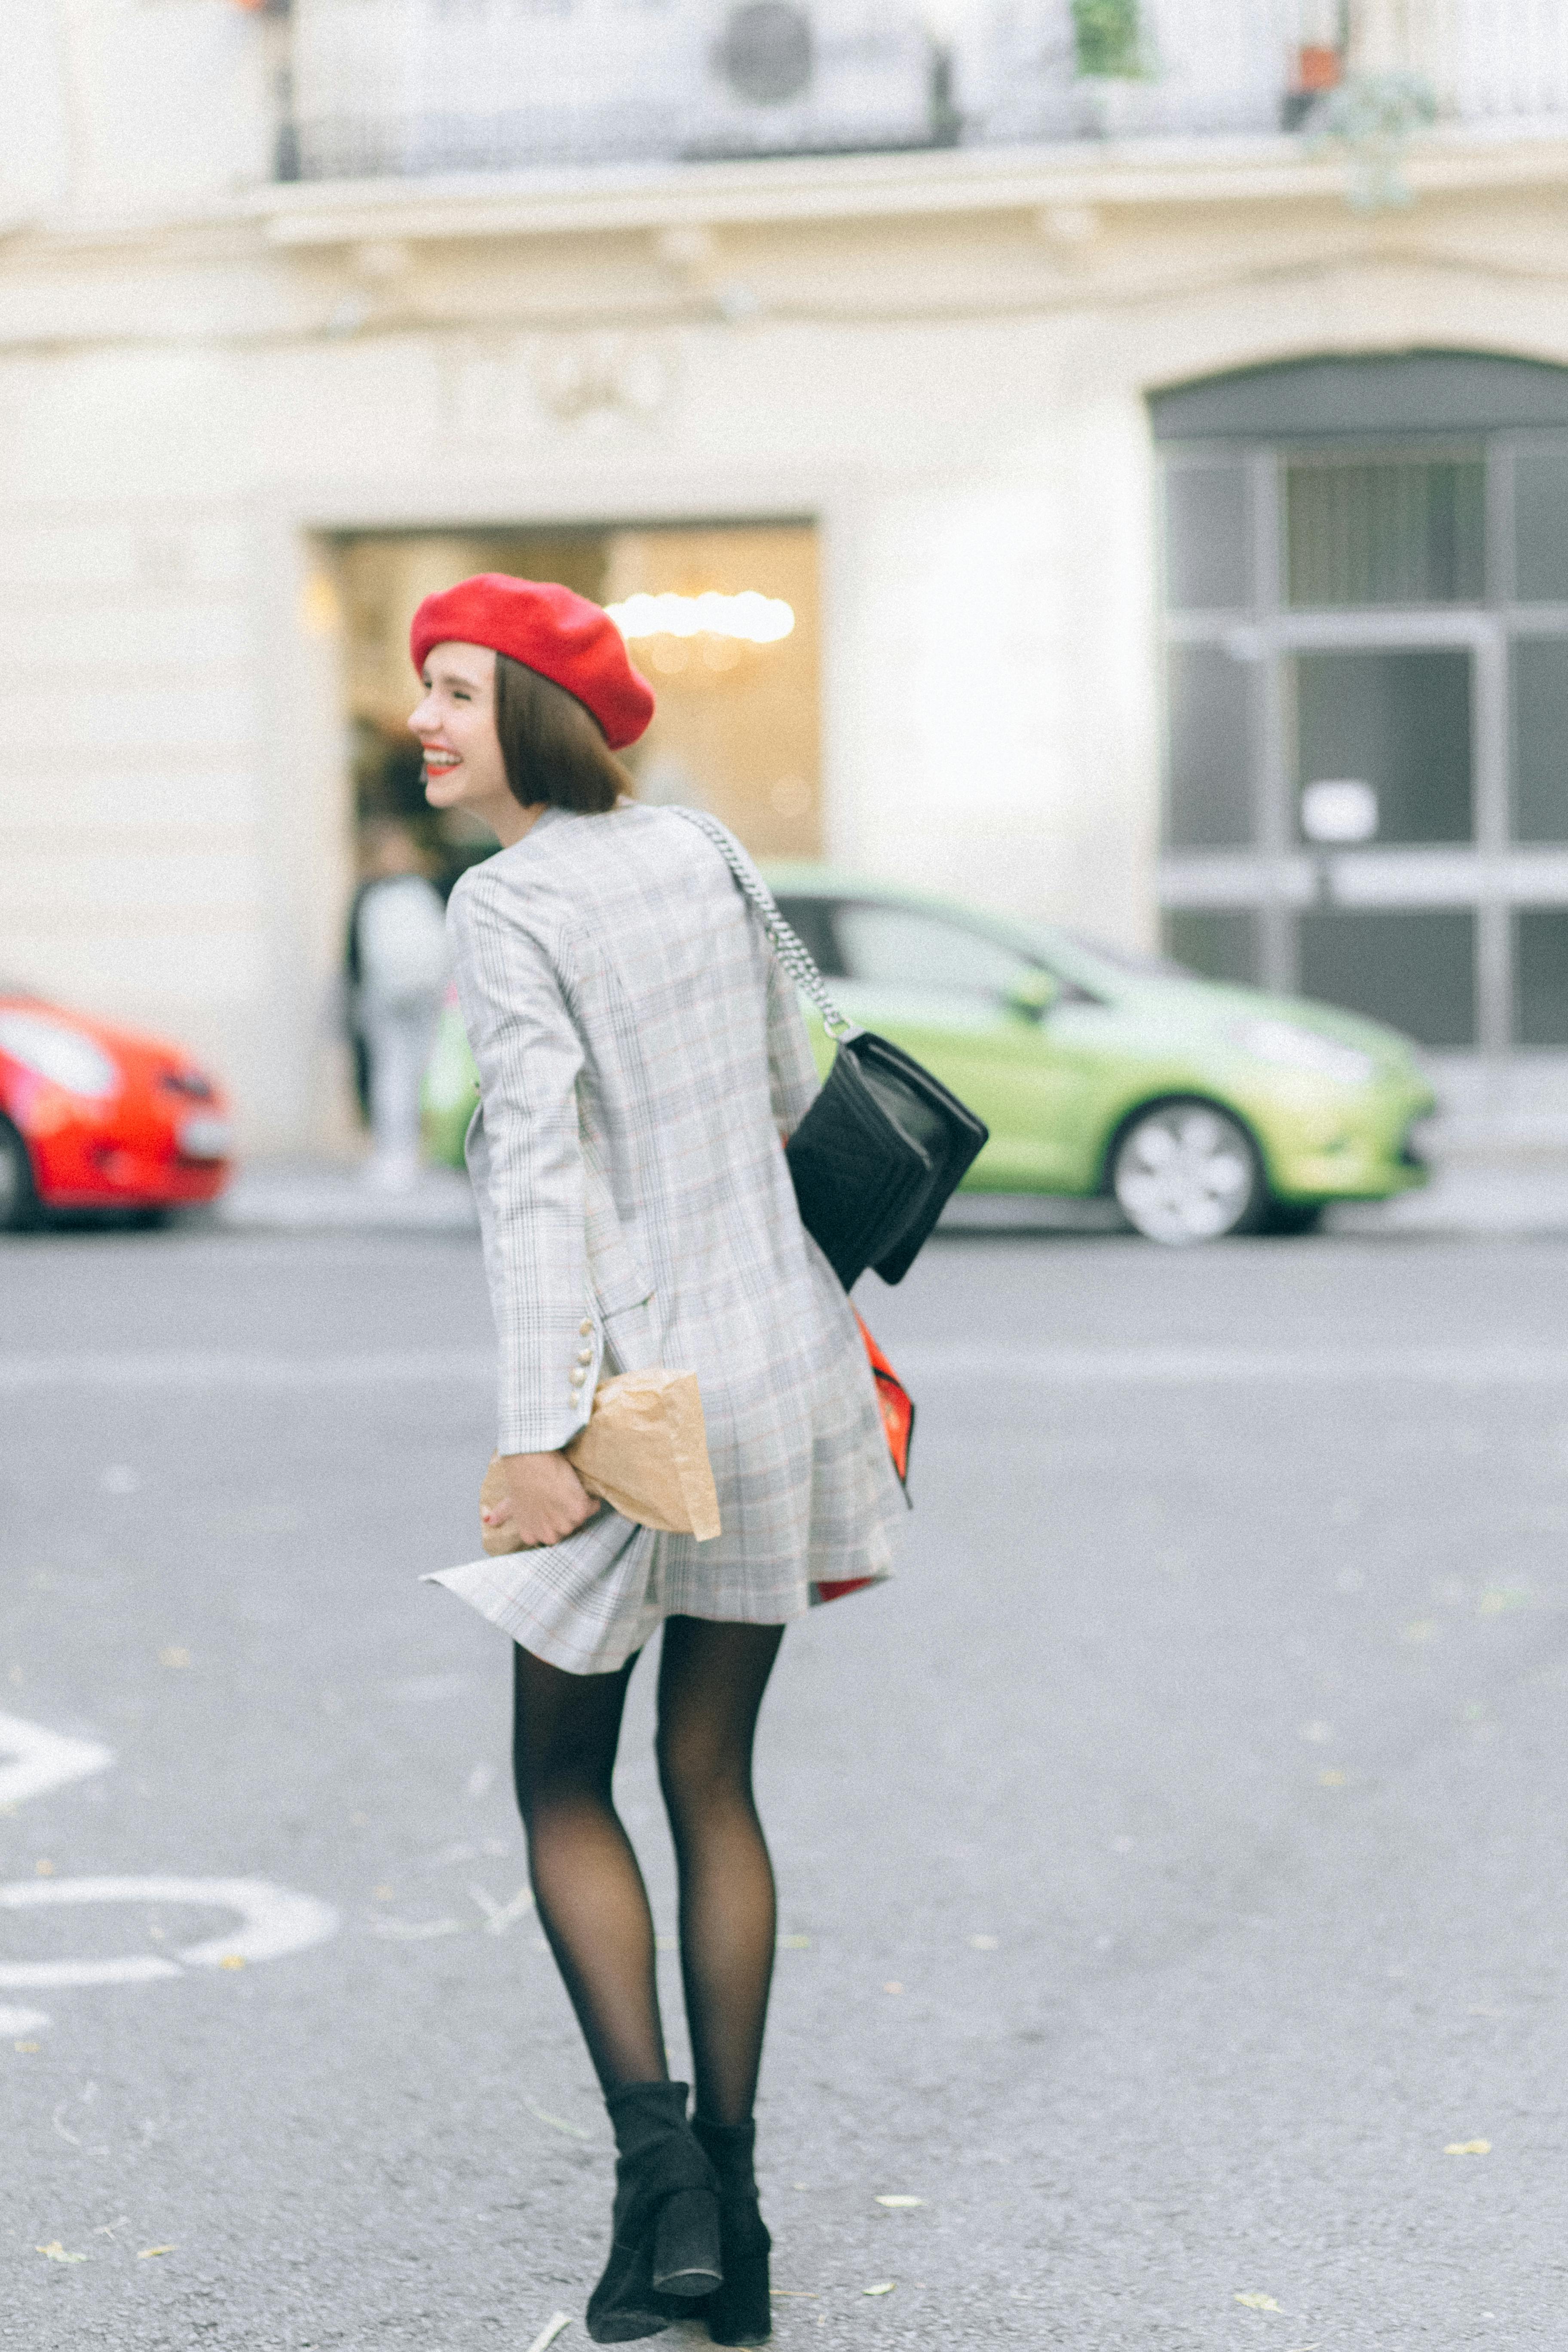 Woman in Gray and White Plaid Coat and Red Hat Standing on Sidewalk · Free Stock Photo